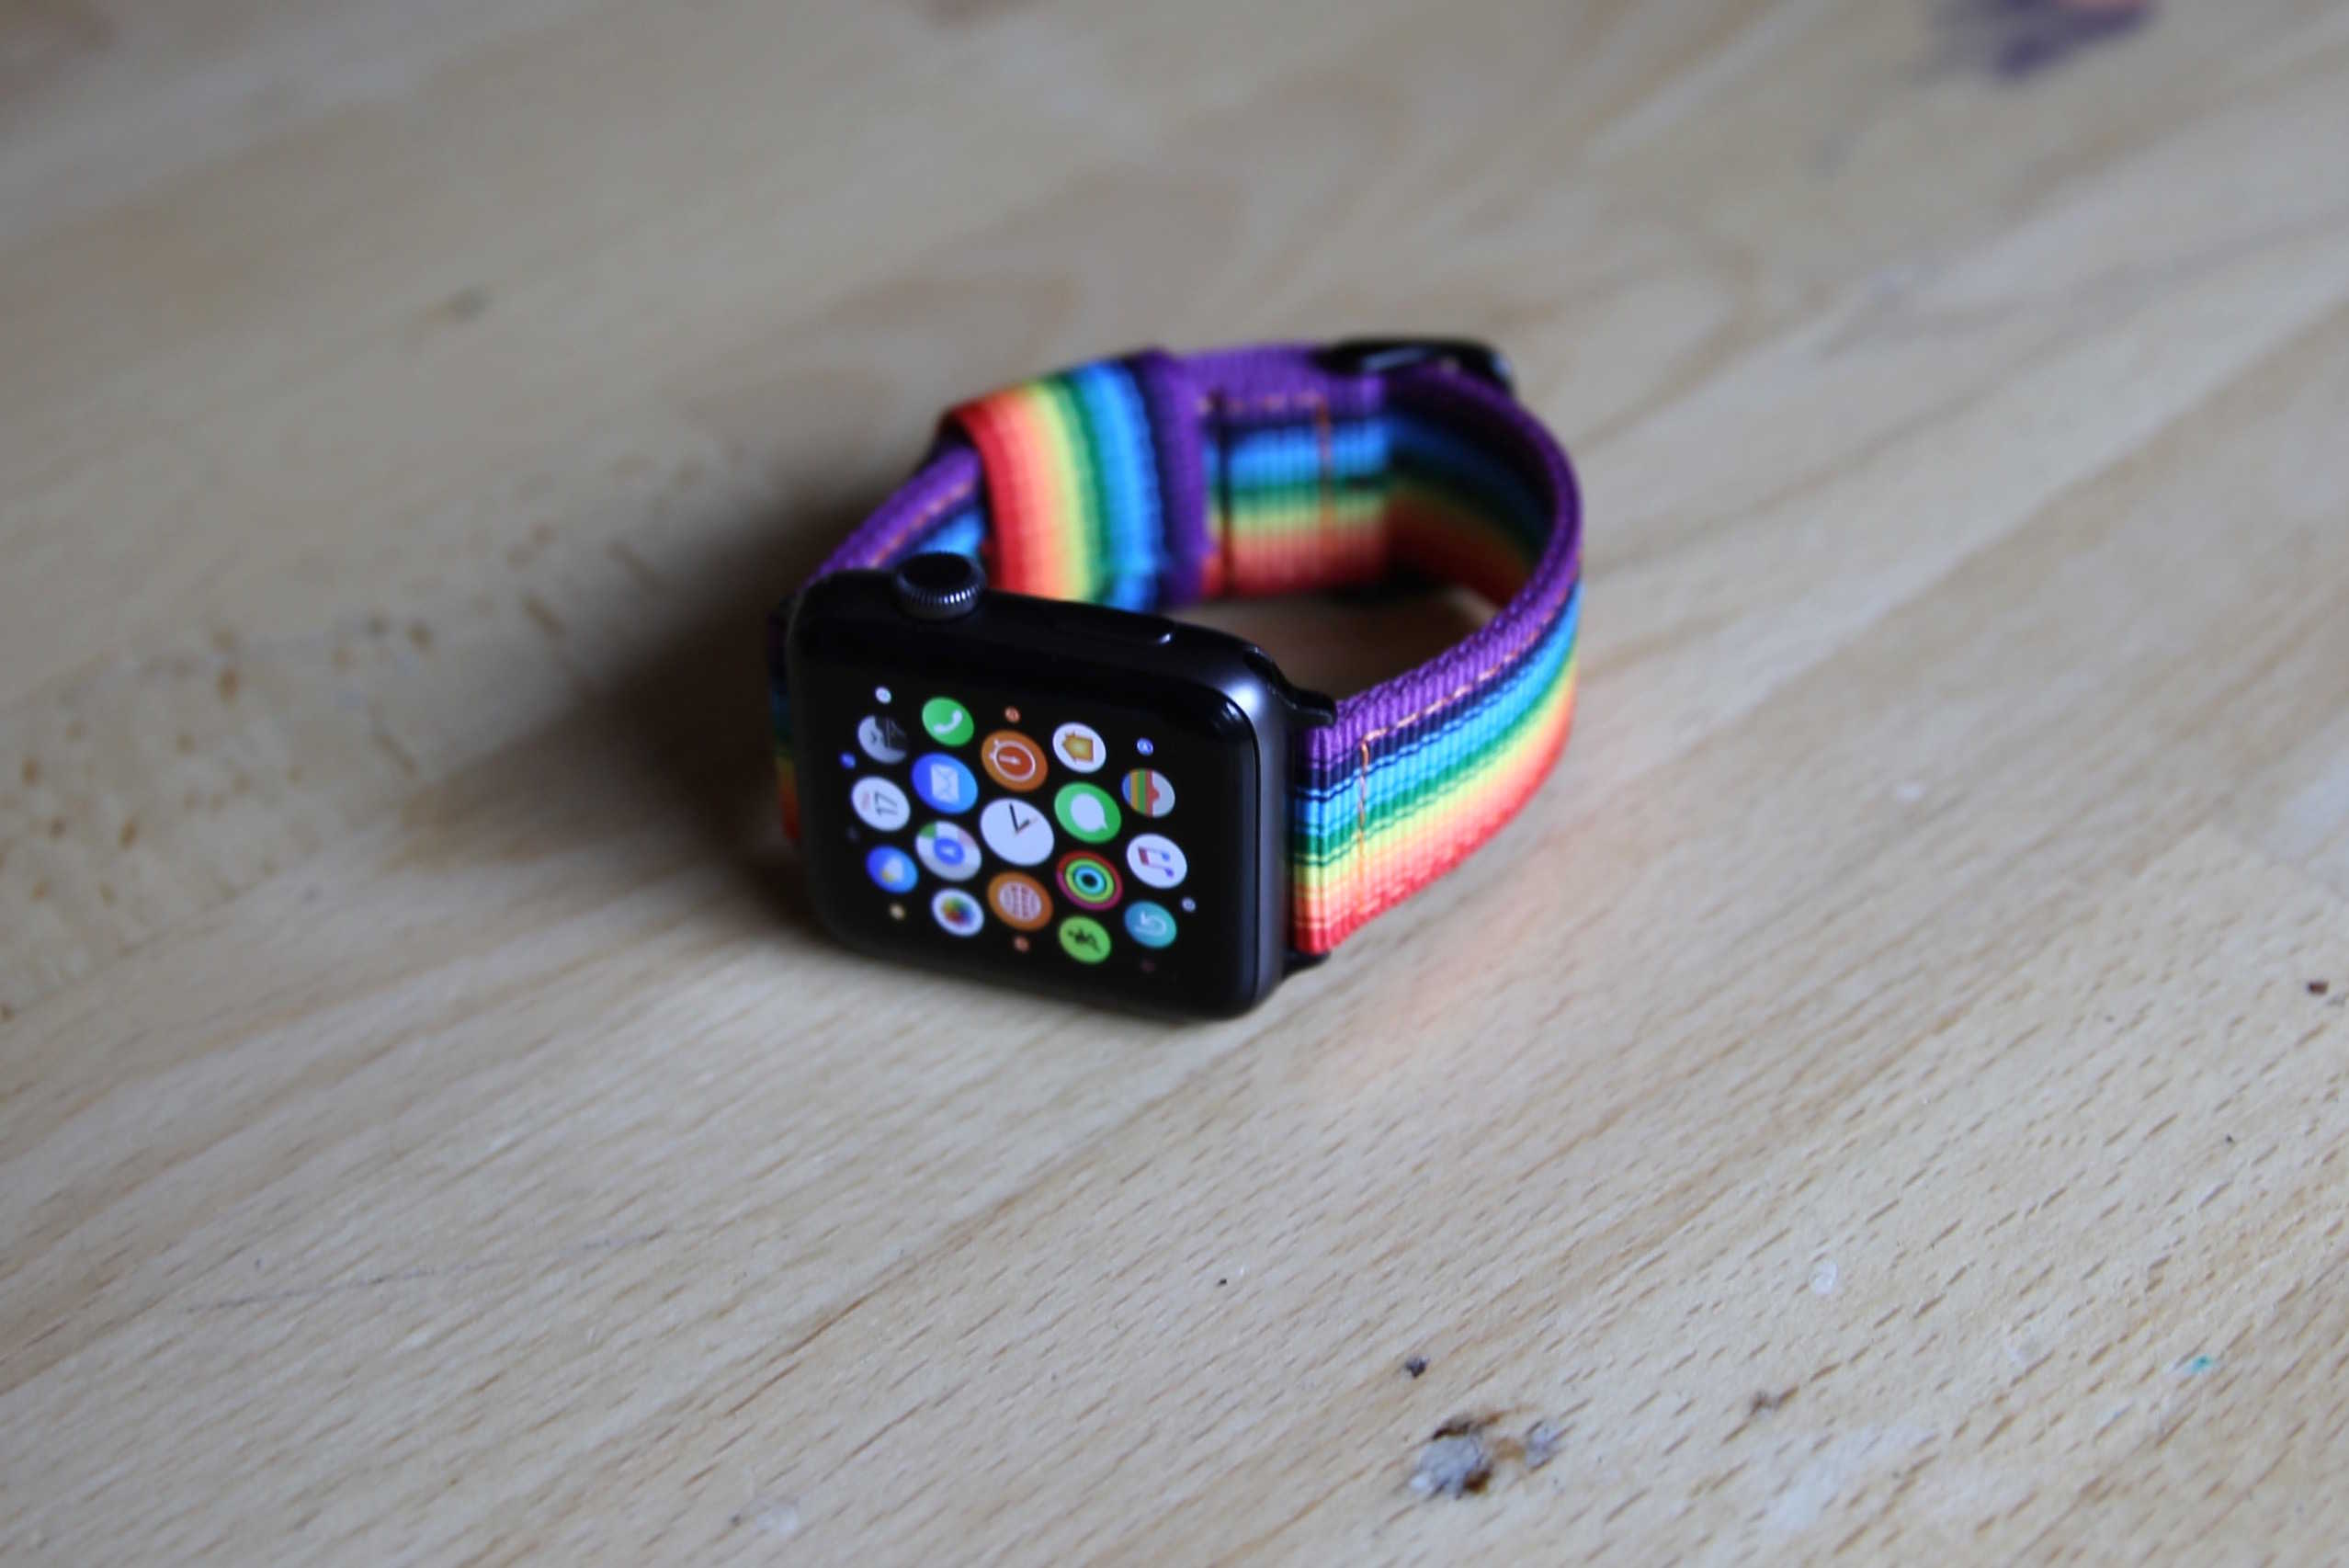 The Love is Love Pride band from Nyloon closely resembles Apple's own rainbow Apple Watch band that was released last year.